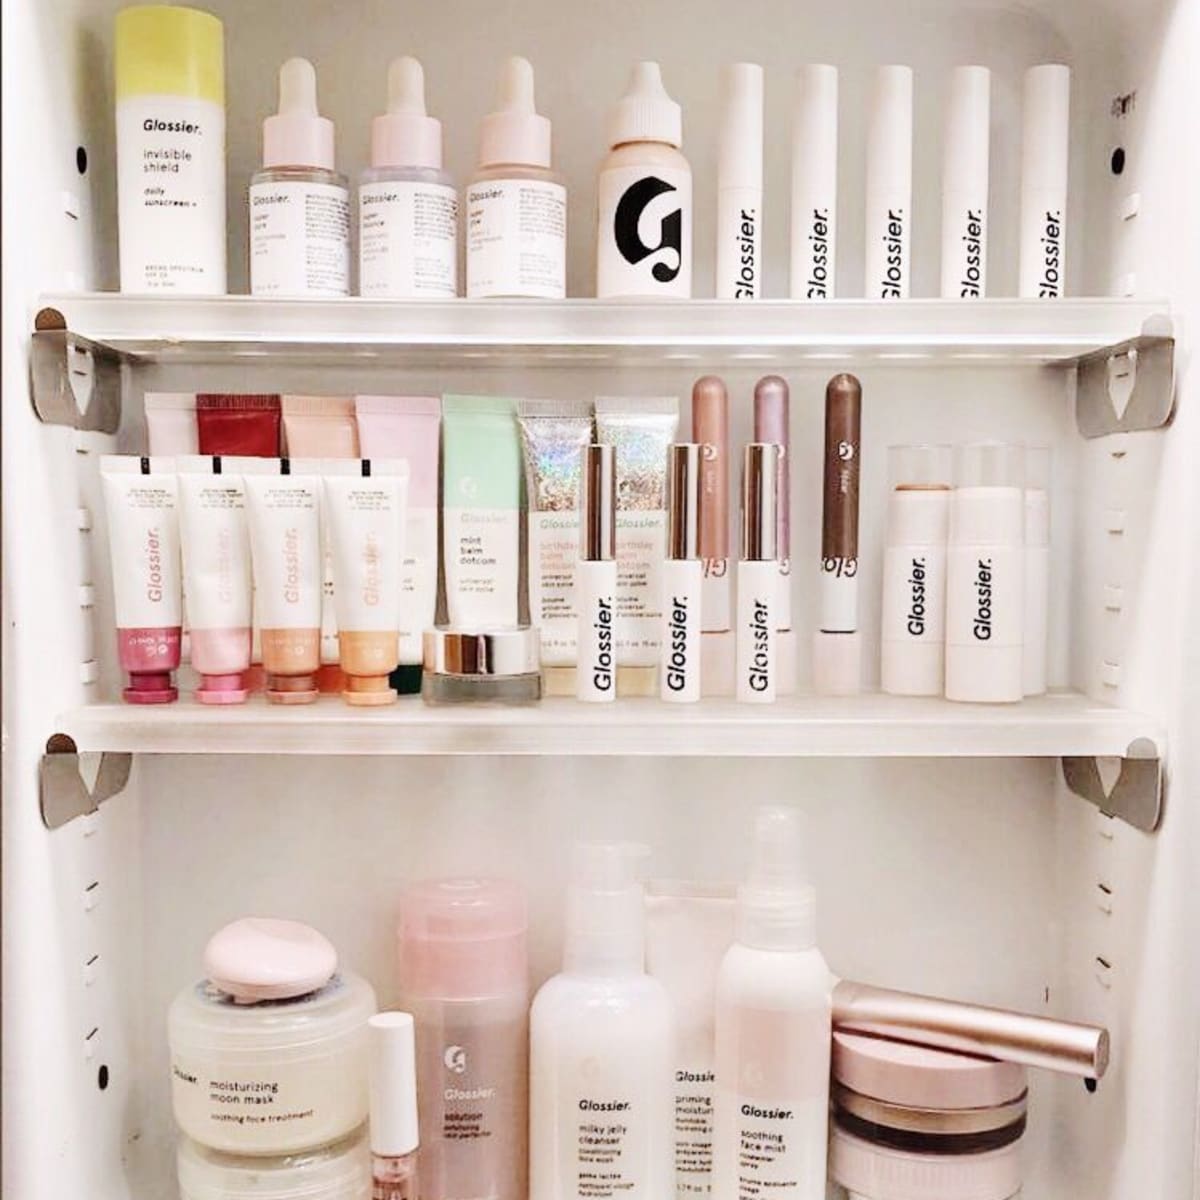 Kelly Katie Are Obsessed with Glossier (Here Are Products That Are Actually Worth It) - Cashmere